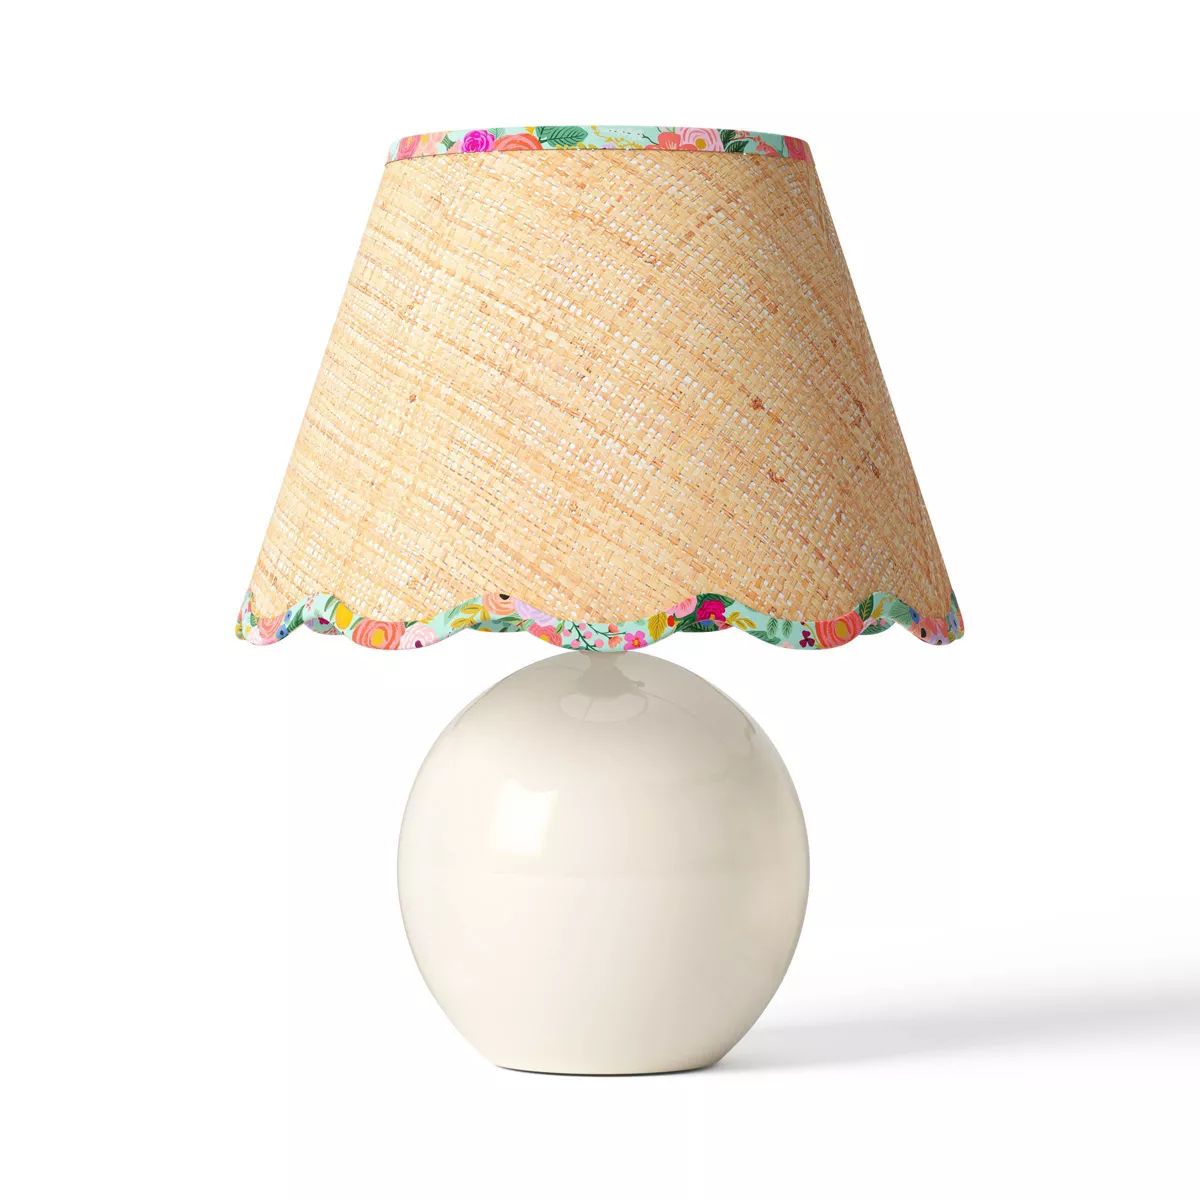 Rifle Paper Co. x Target Round Table Lamp - Natural Shade with Garden Party Trim | Target